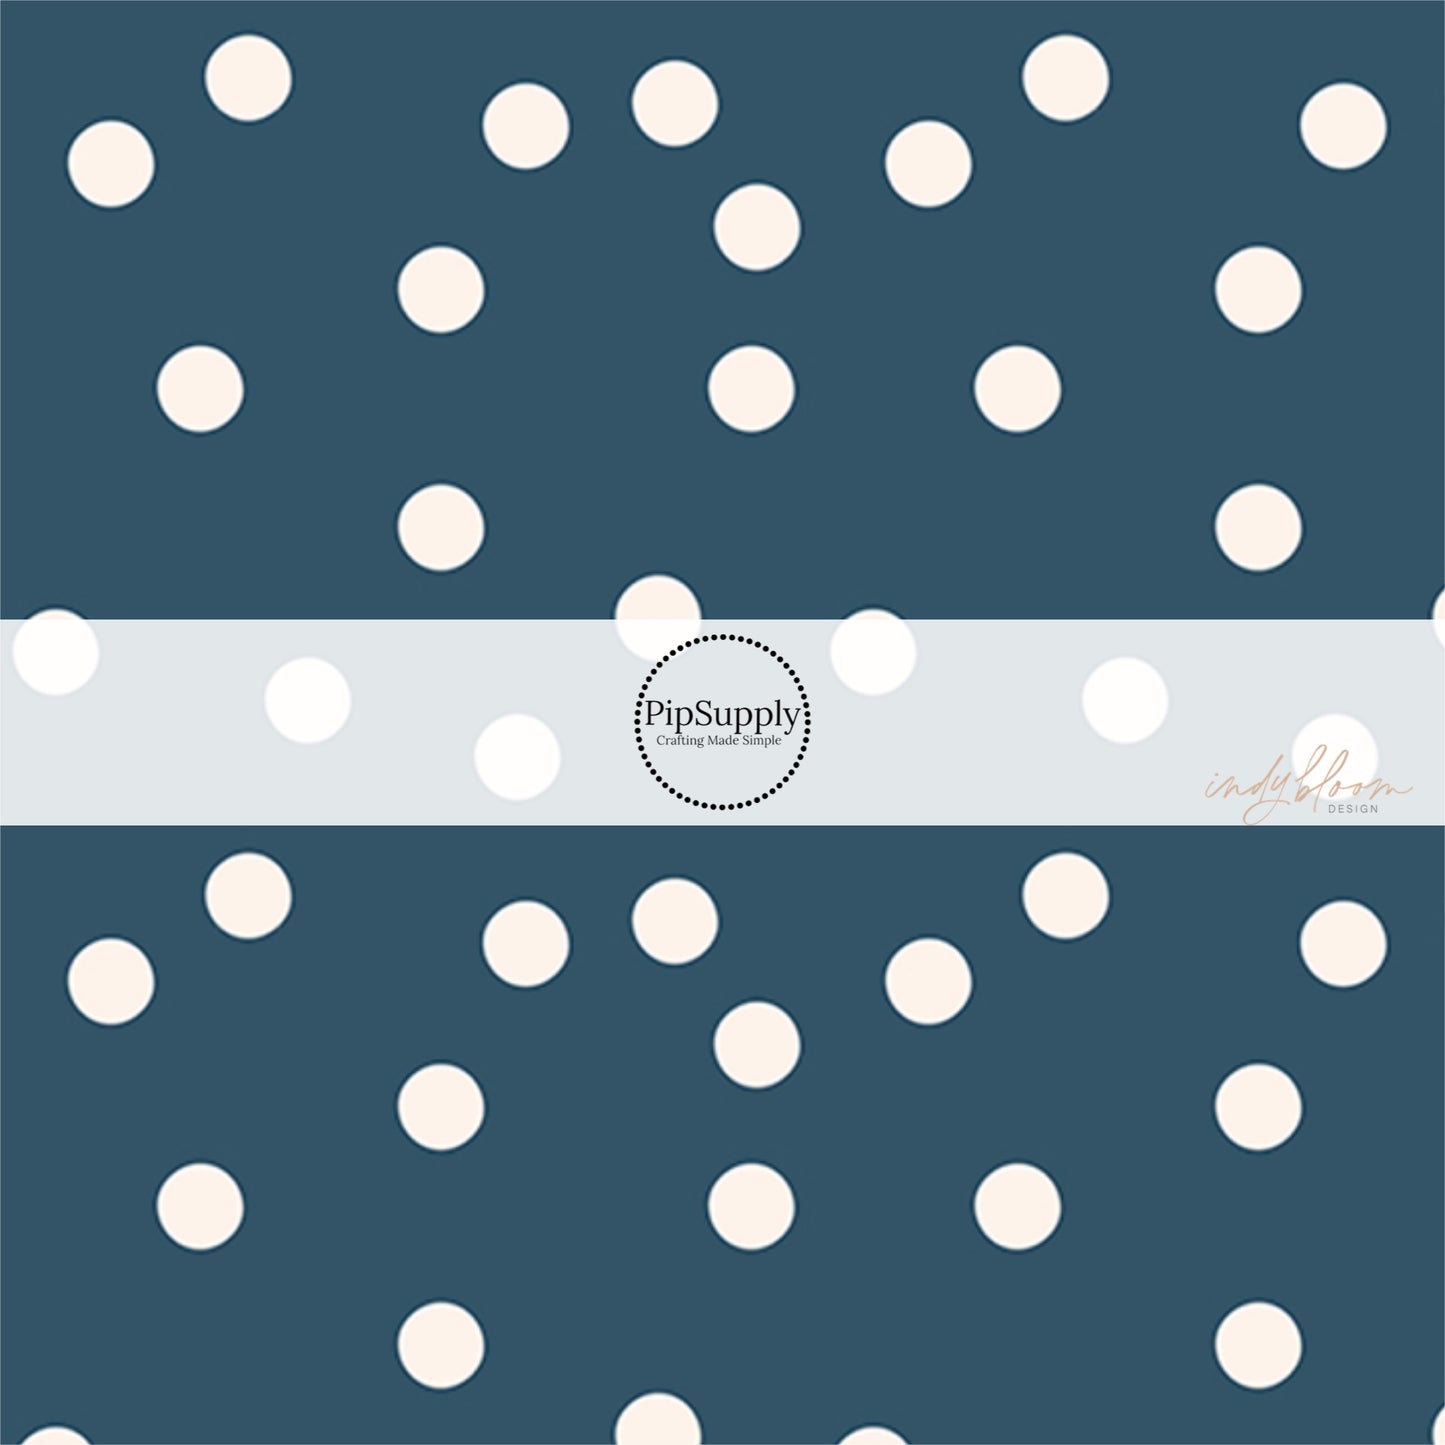 These dot themed fabric by the yard features small white dots on dark blue. This fun dotted themed fabric can be used for all your sewing and crafting needs! 